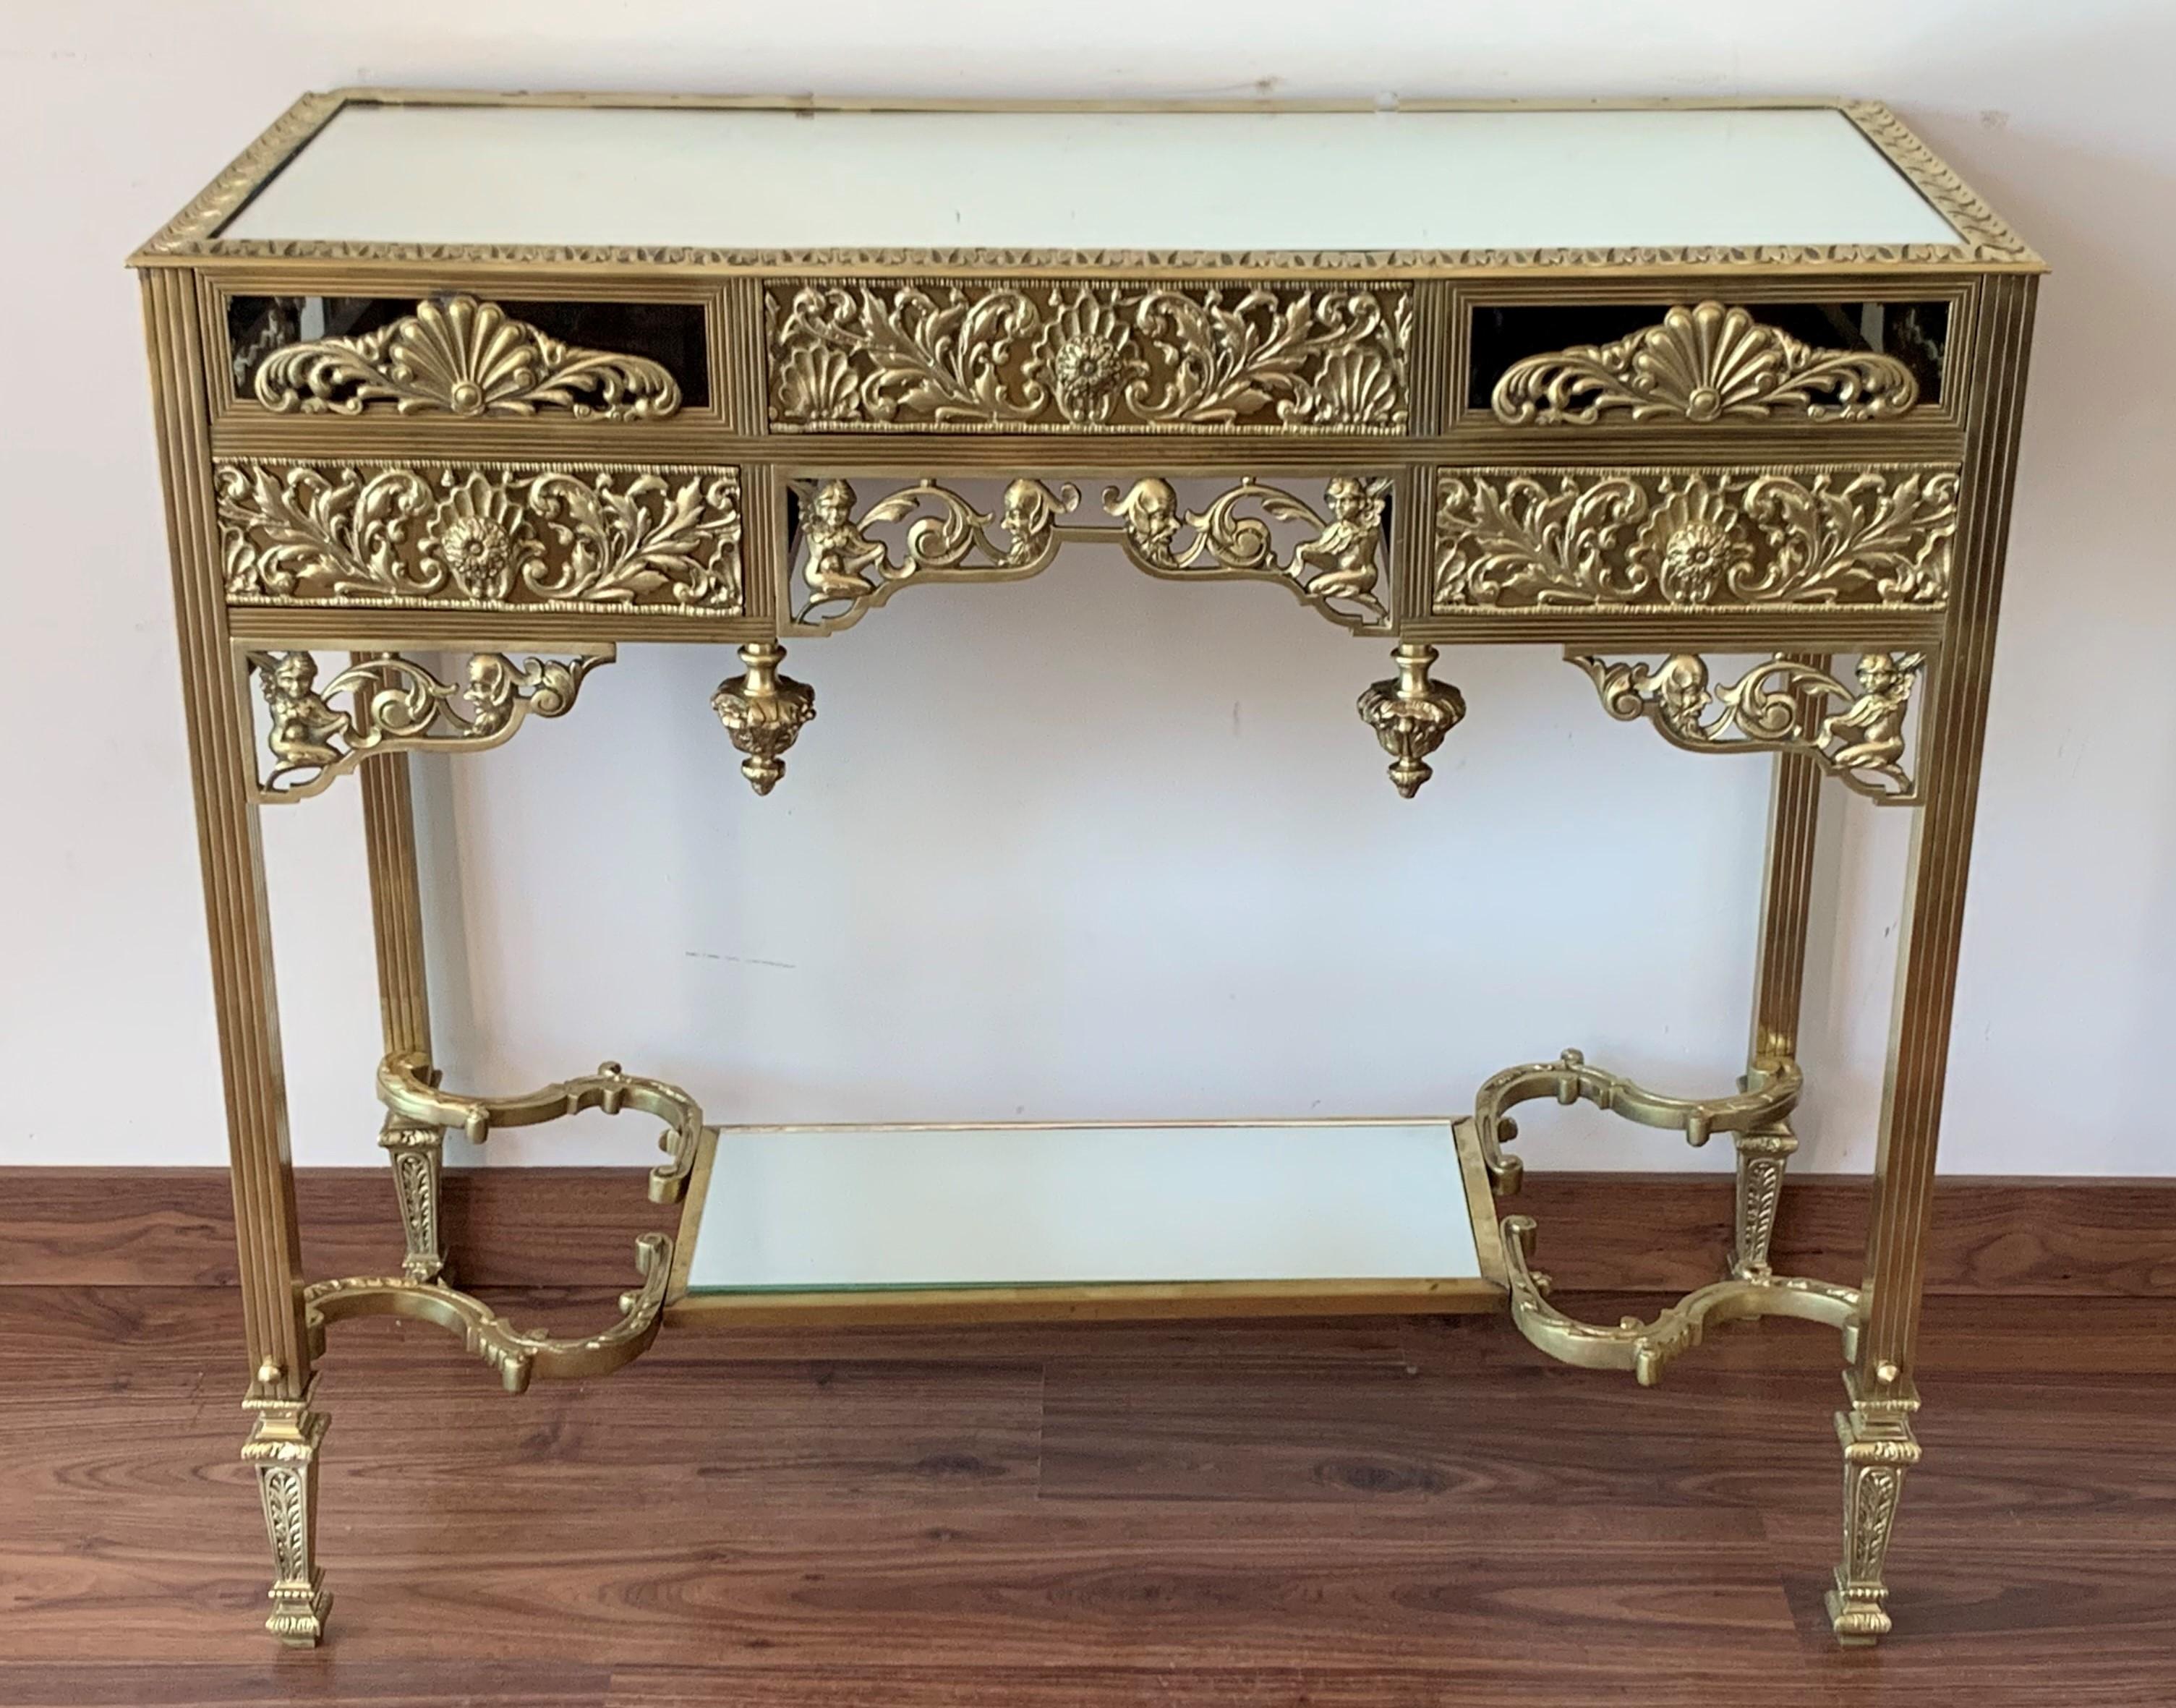 Baroque 19th Century French Bronze Mirrored Dressing Table or Vanity with Three Drawers